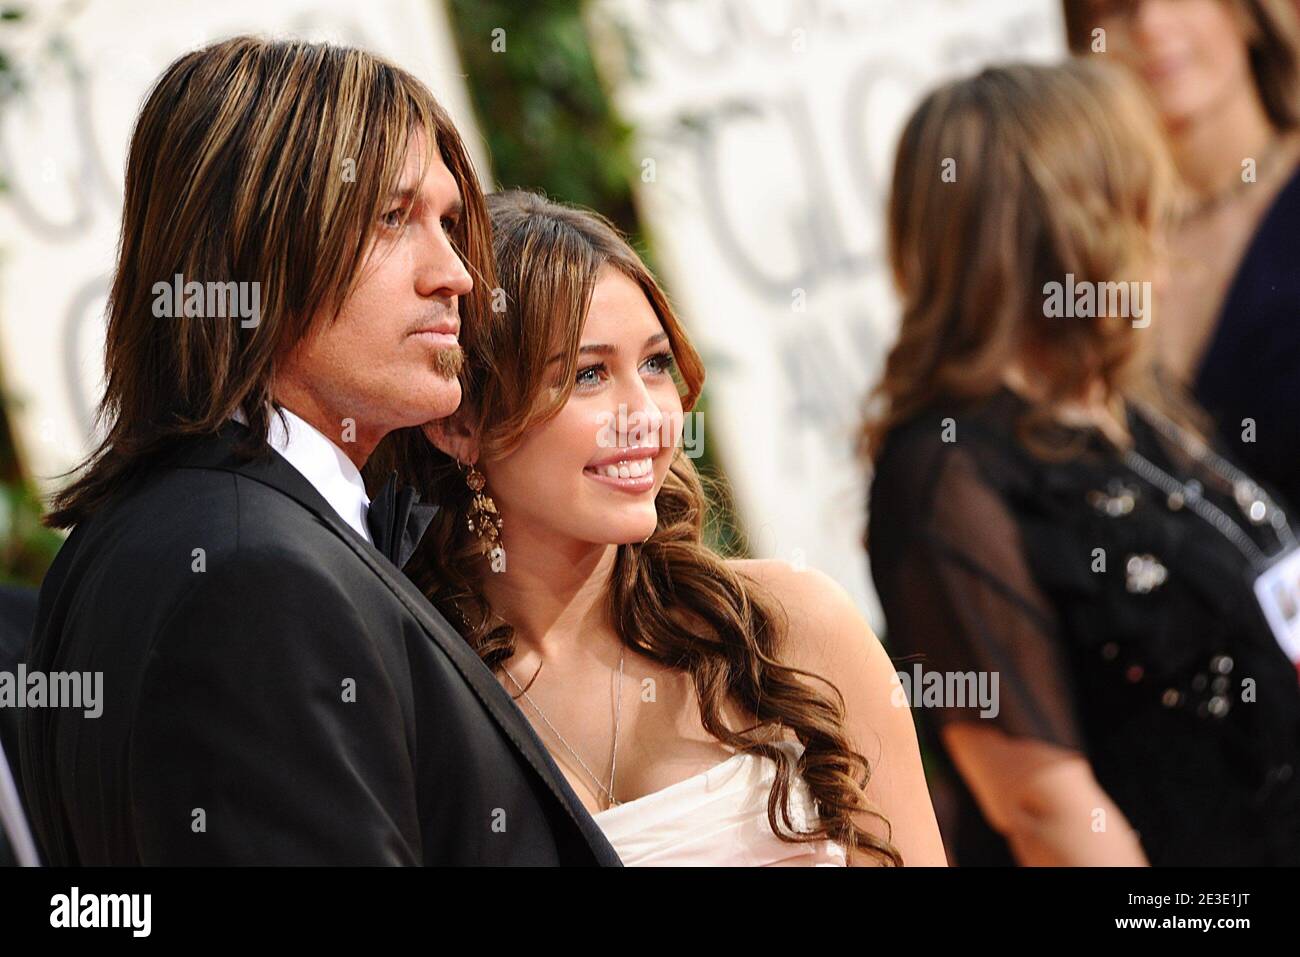 Billy Ray Cyrus and daughter Miley Cyrus arriving at the 66th Annual Golden Globe Awards ceremony held at the Beverly Hilton Hotel in Beverly Hills, Los Angeles, CA, USA on January 11, 2009. Photo by Lionel Hahn/ABACAPRESS.COM Stock Photo